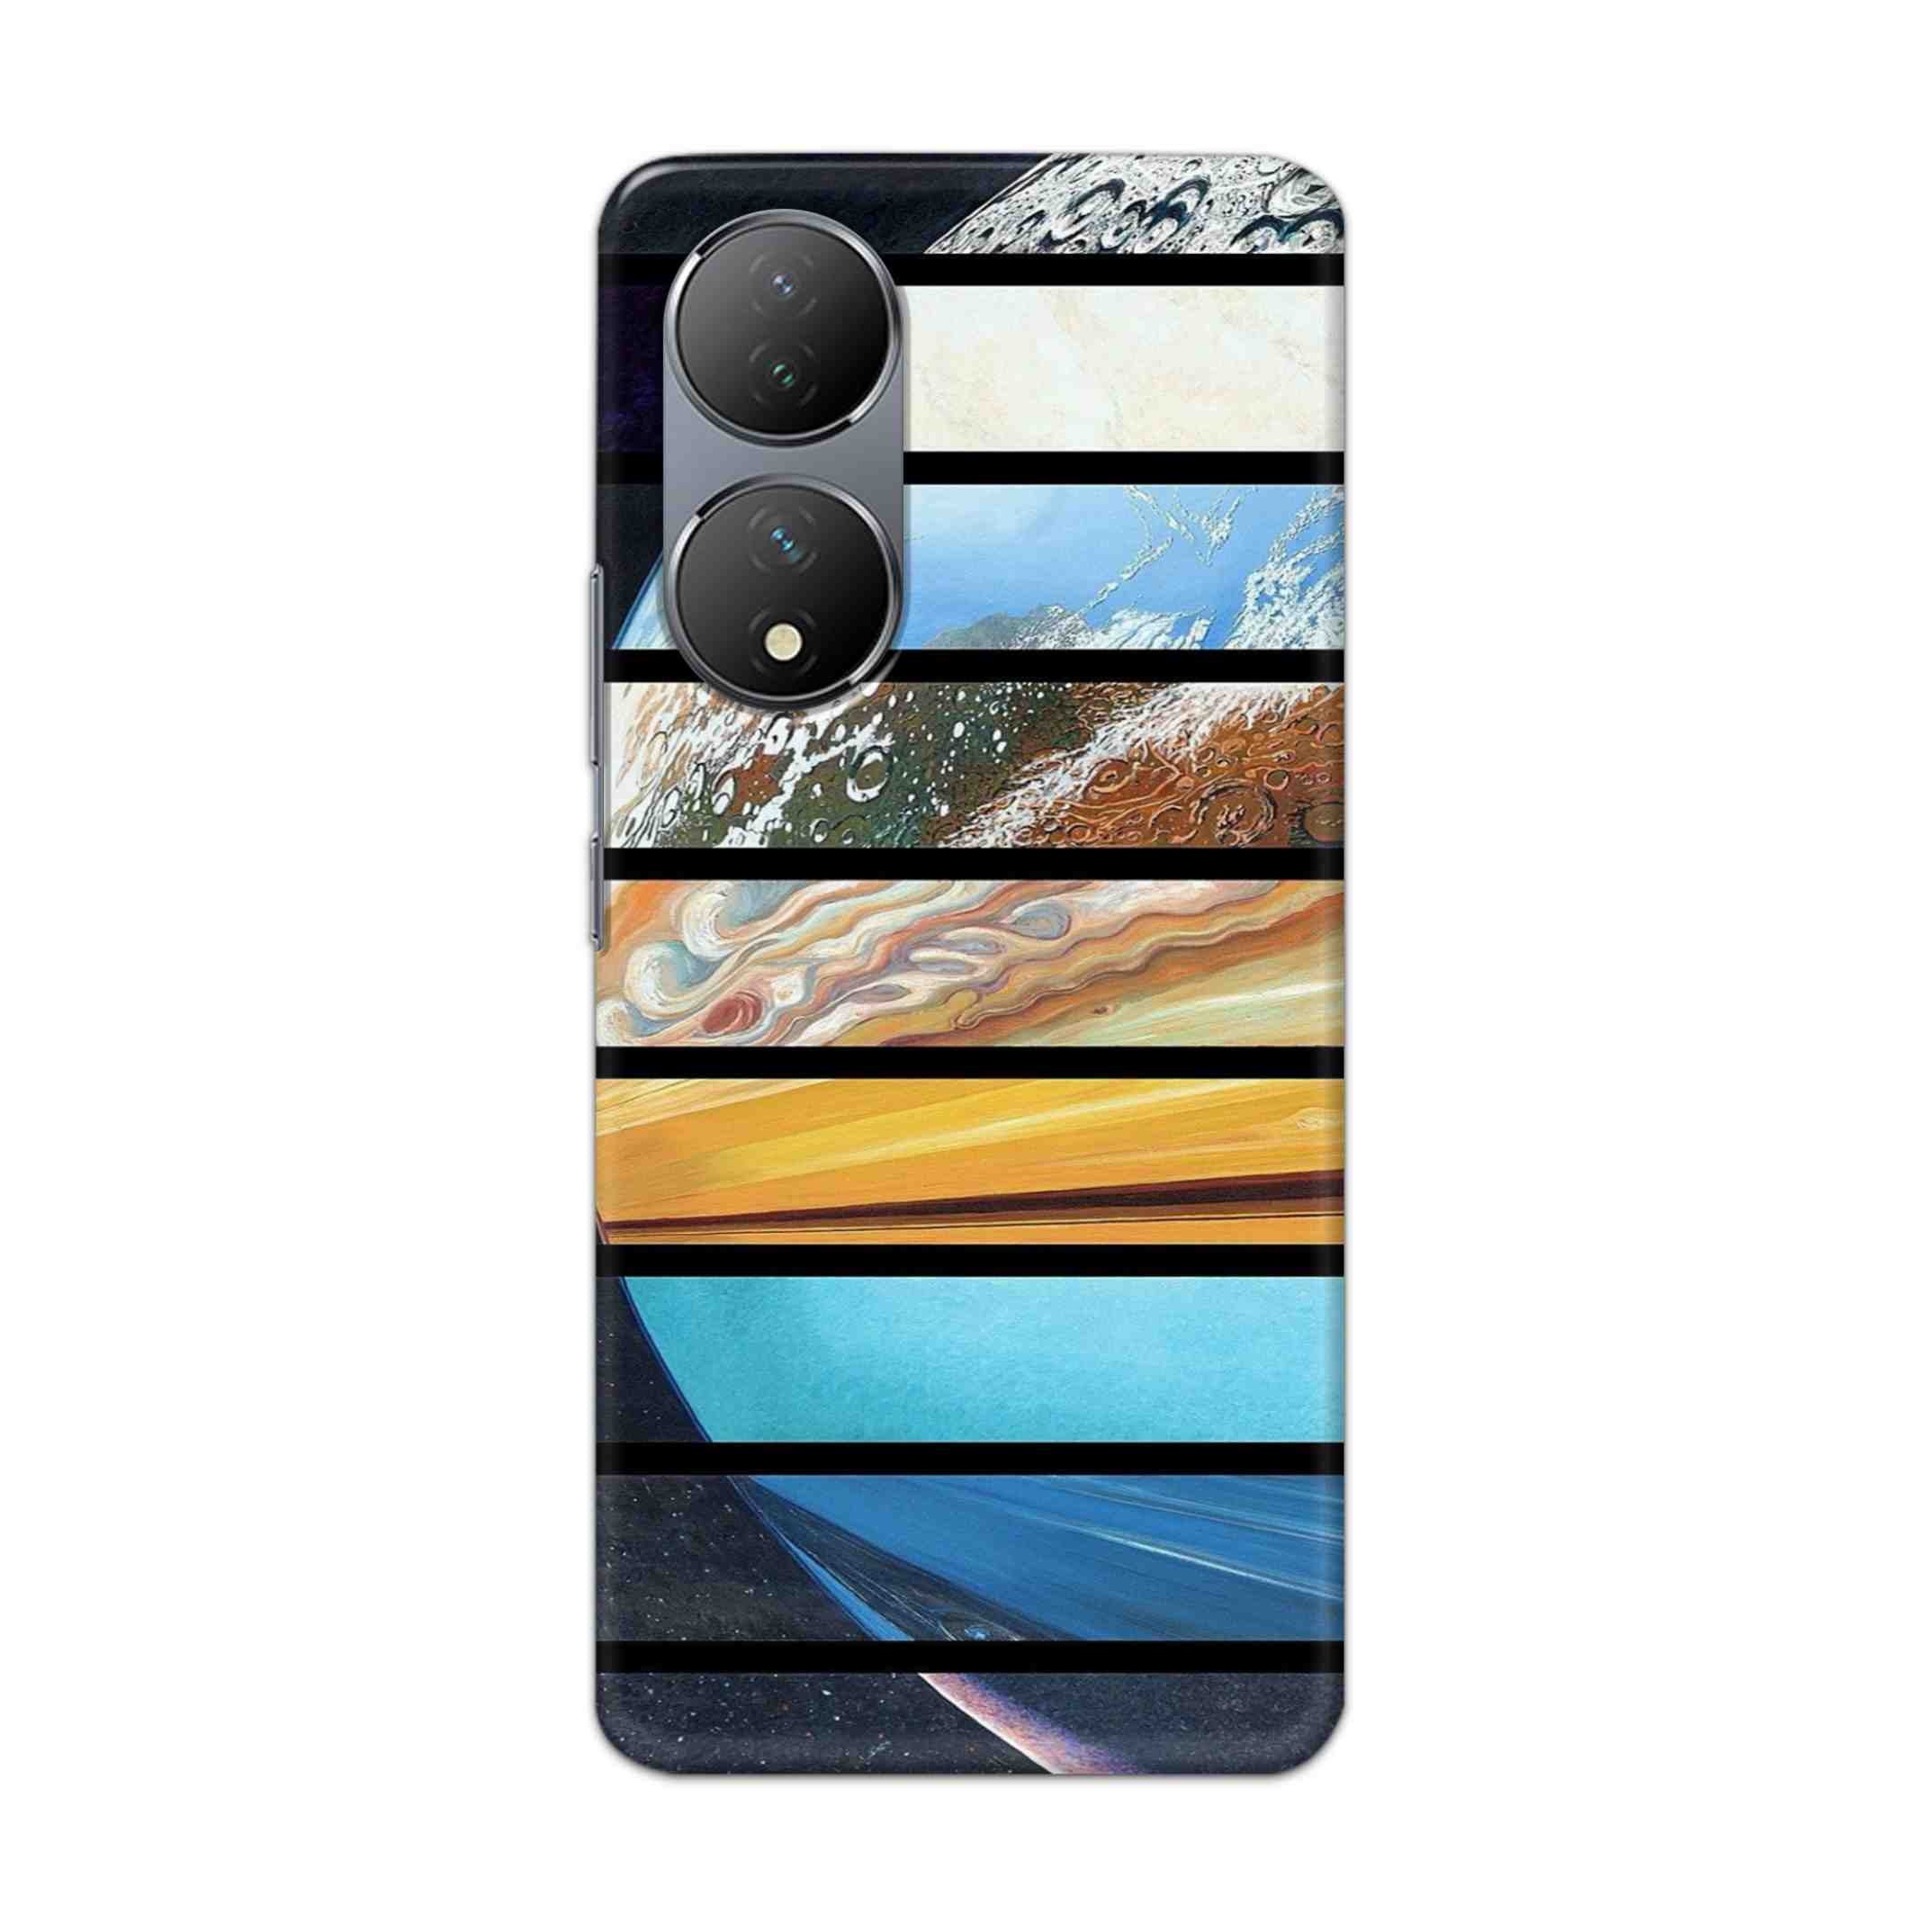 Buy Colourful Earth Hard Back Mobile Phone Case Cover For Vivo Y100 Online